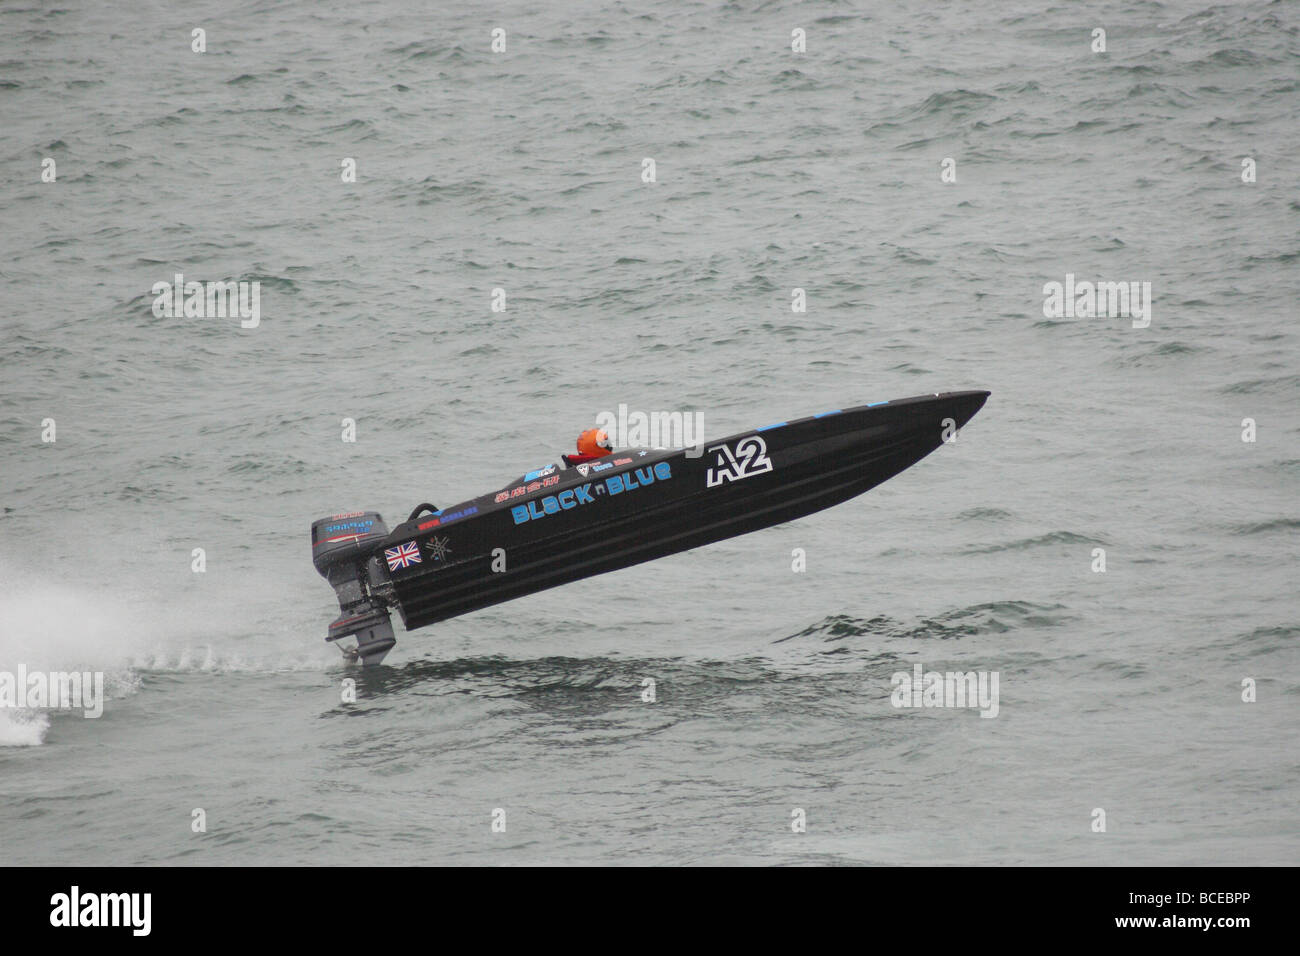 Powerboat racing off the North Devon coast in the UK Stock Photo